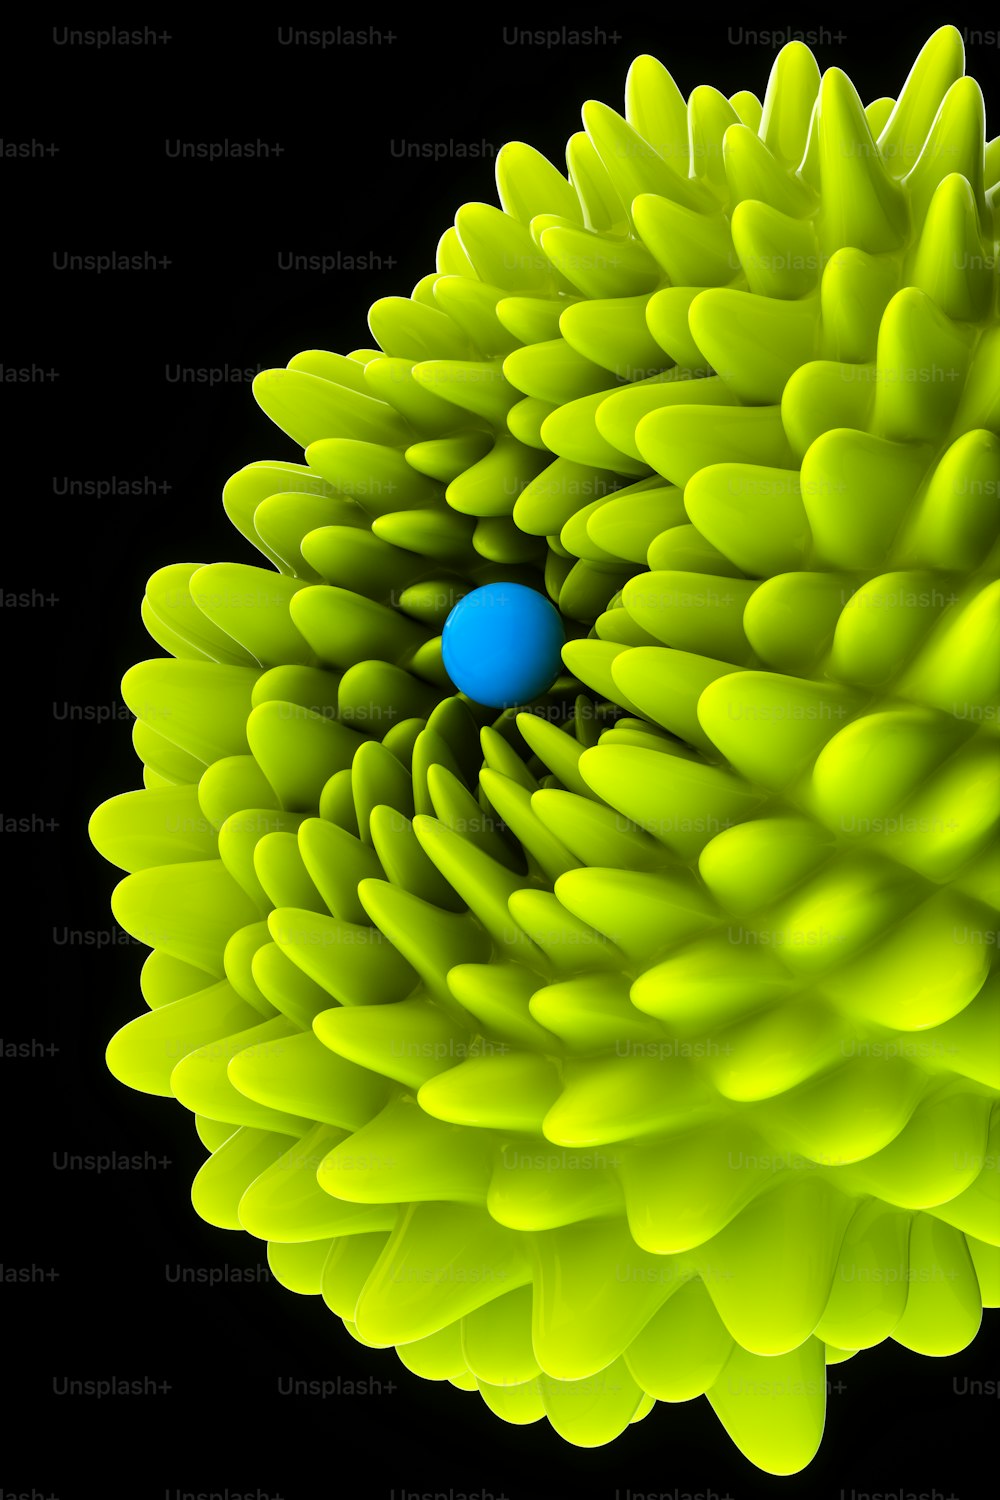 a blue ball is in the center of a yellow flower